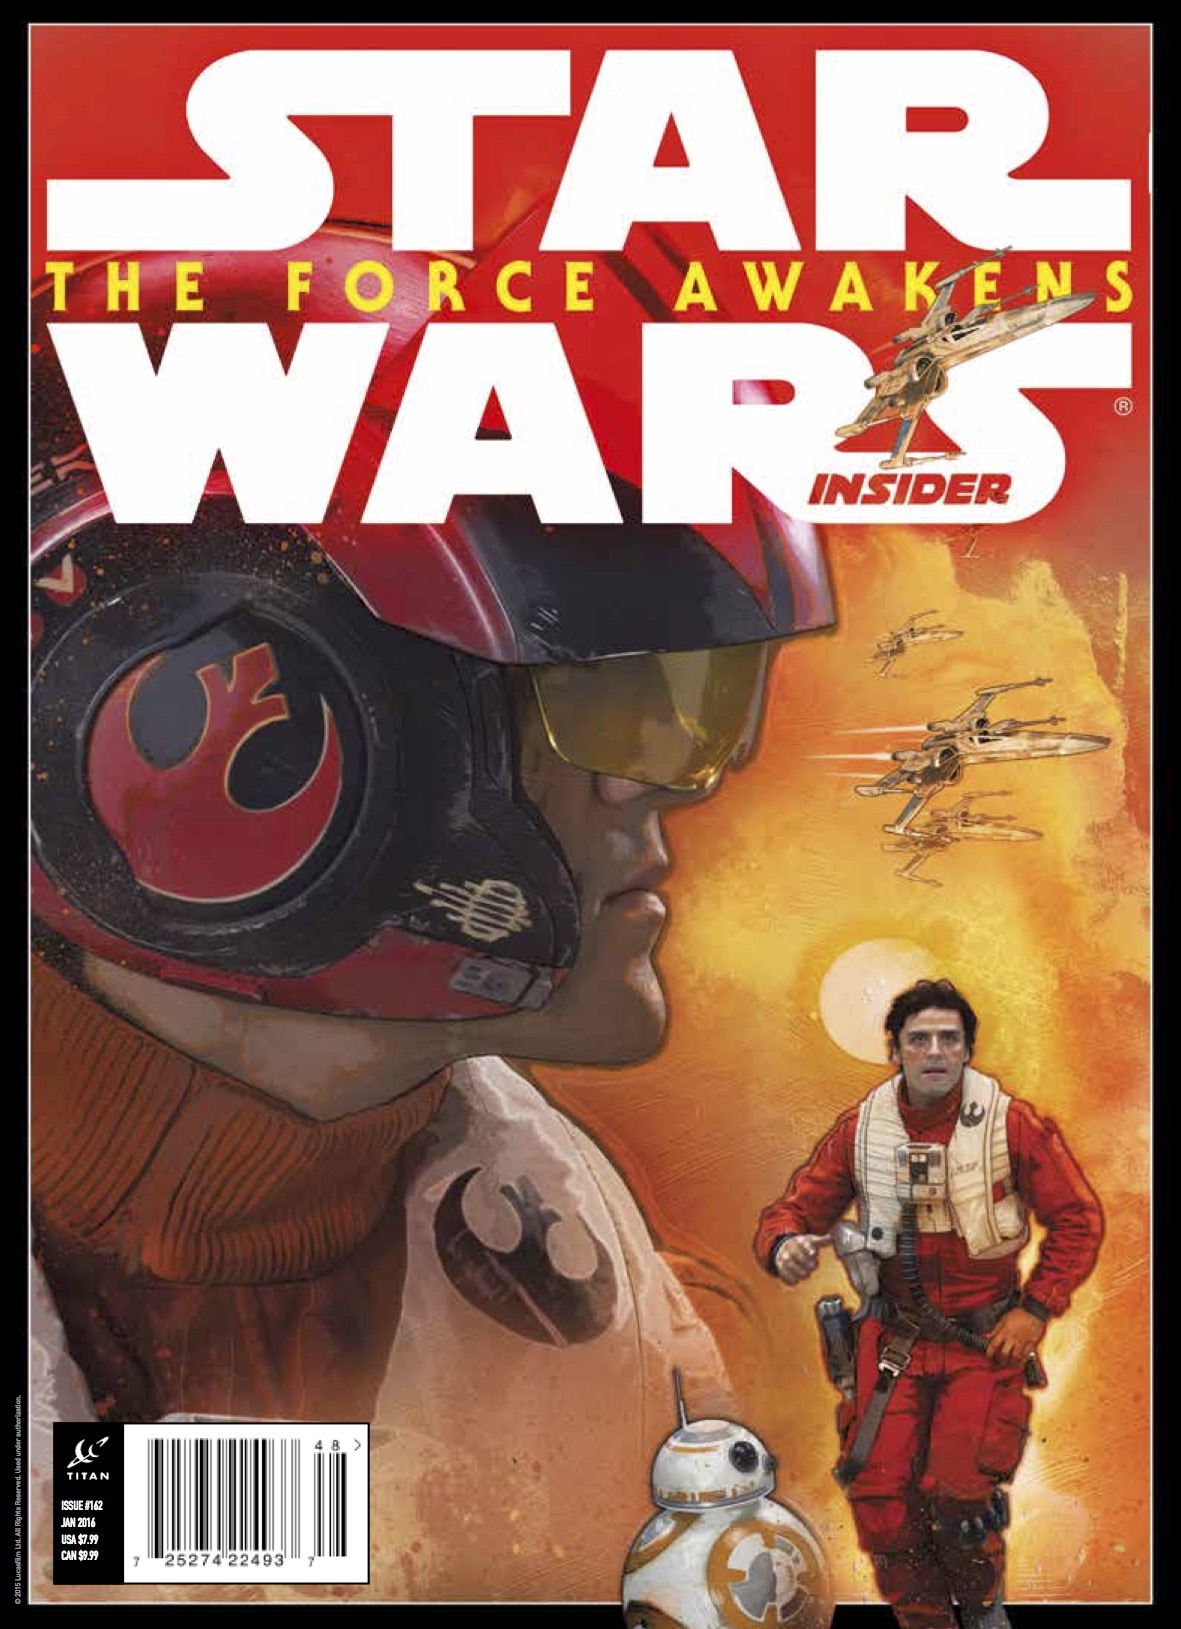 Star Wars Insider #162 (Comic Store Cover)